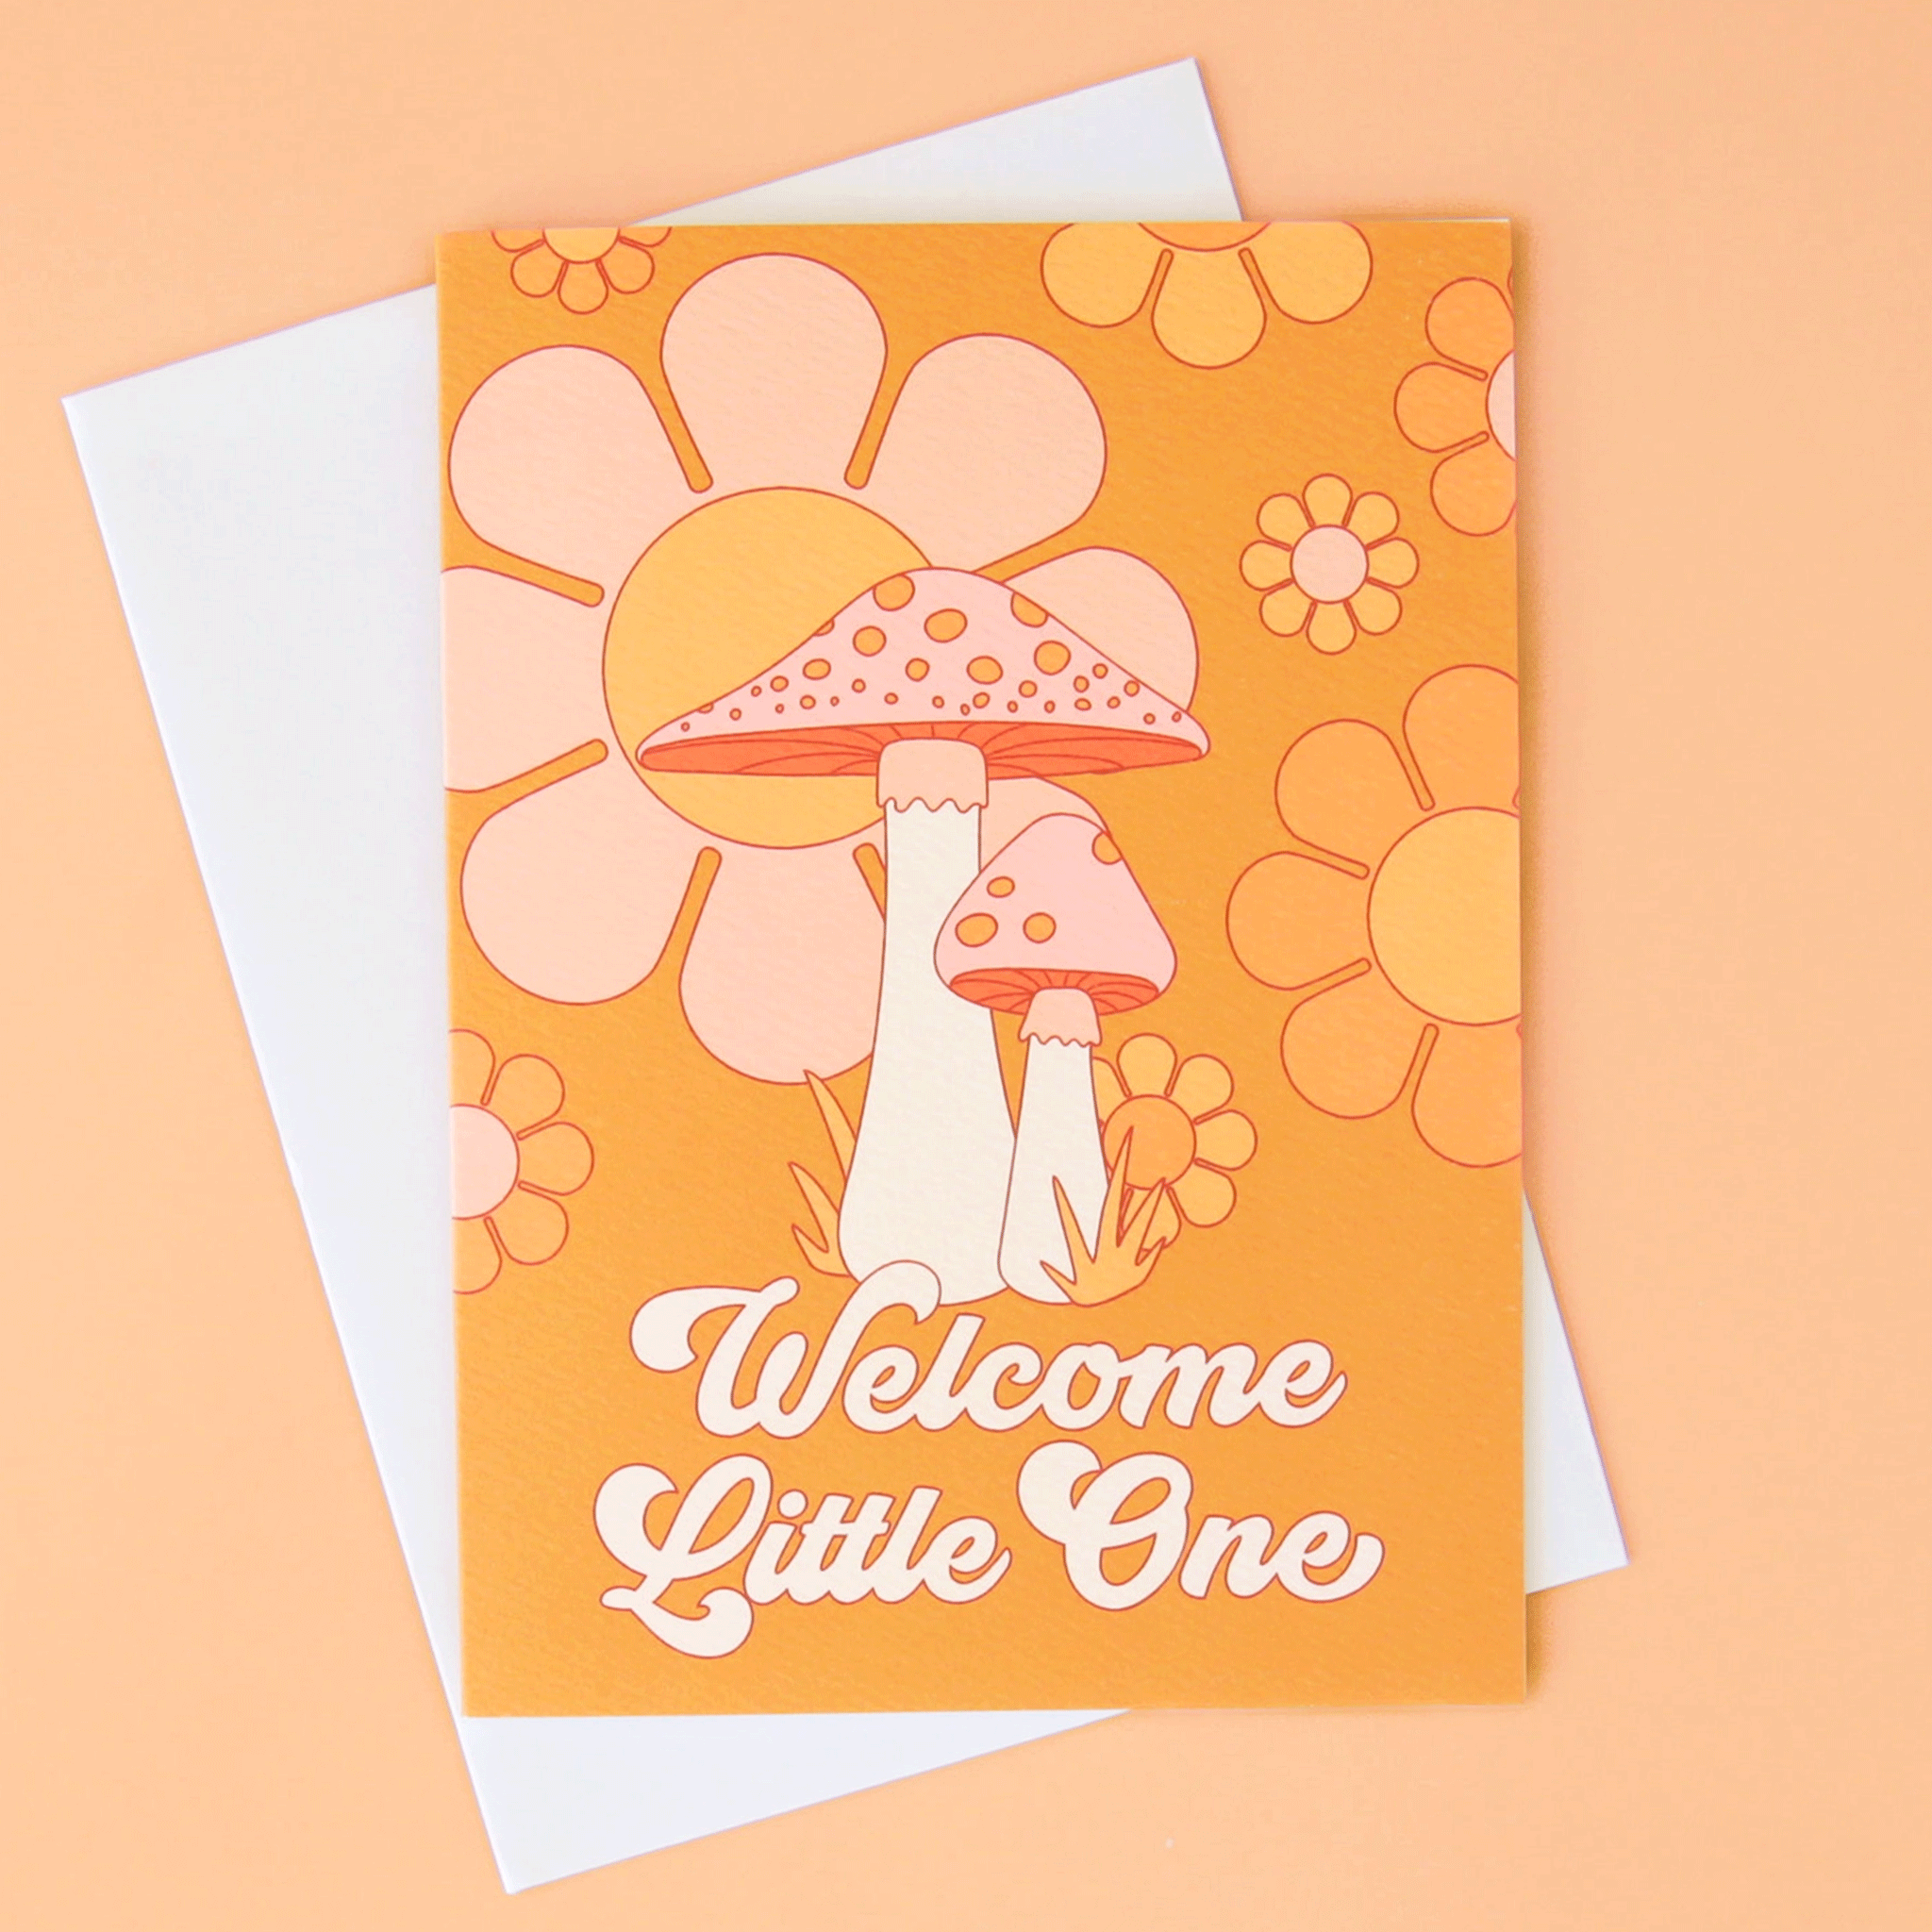 On a peachy background is an orange card with a floral and mushroom design along with white text that reads, "Welcome Little One".